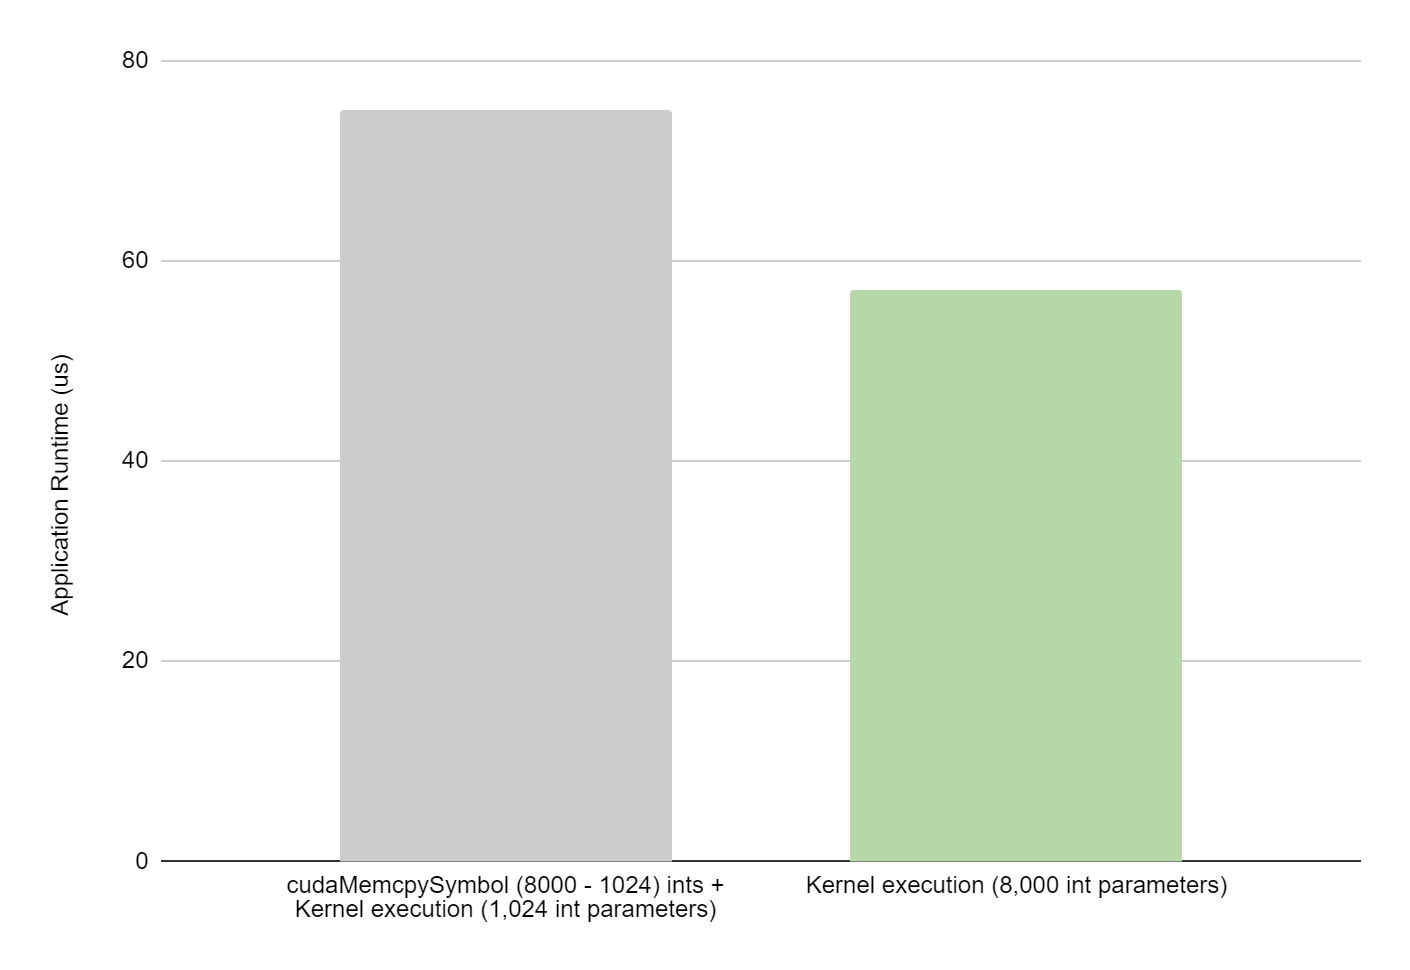 Bar graph showing application performance gain with large kernel parameters on NVIDIA H100. The time in the gray bar (on left) includes the execution time for a kernel where 1,024 integers are passed as kernel parameters and the other (8,000 - 1,024) integers are copied using constant memory (code snippet 1). The green bar (on right) shows the execution time for a kernel where all 8,000 integers are passed as kernel parameters (code snippet 2). Both kernels accumulate 8,000 integers.
